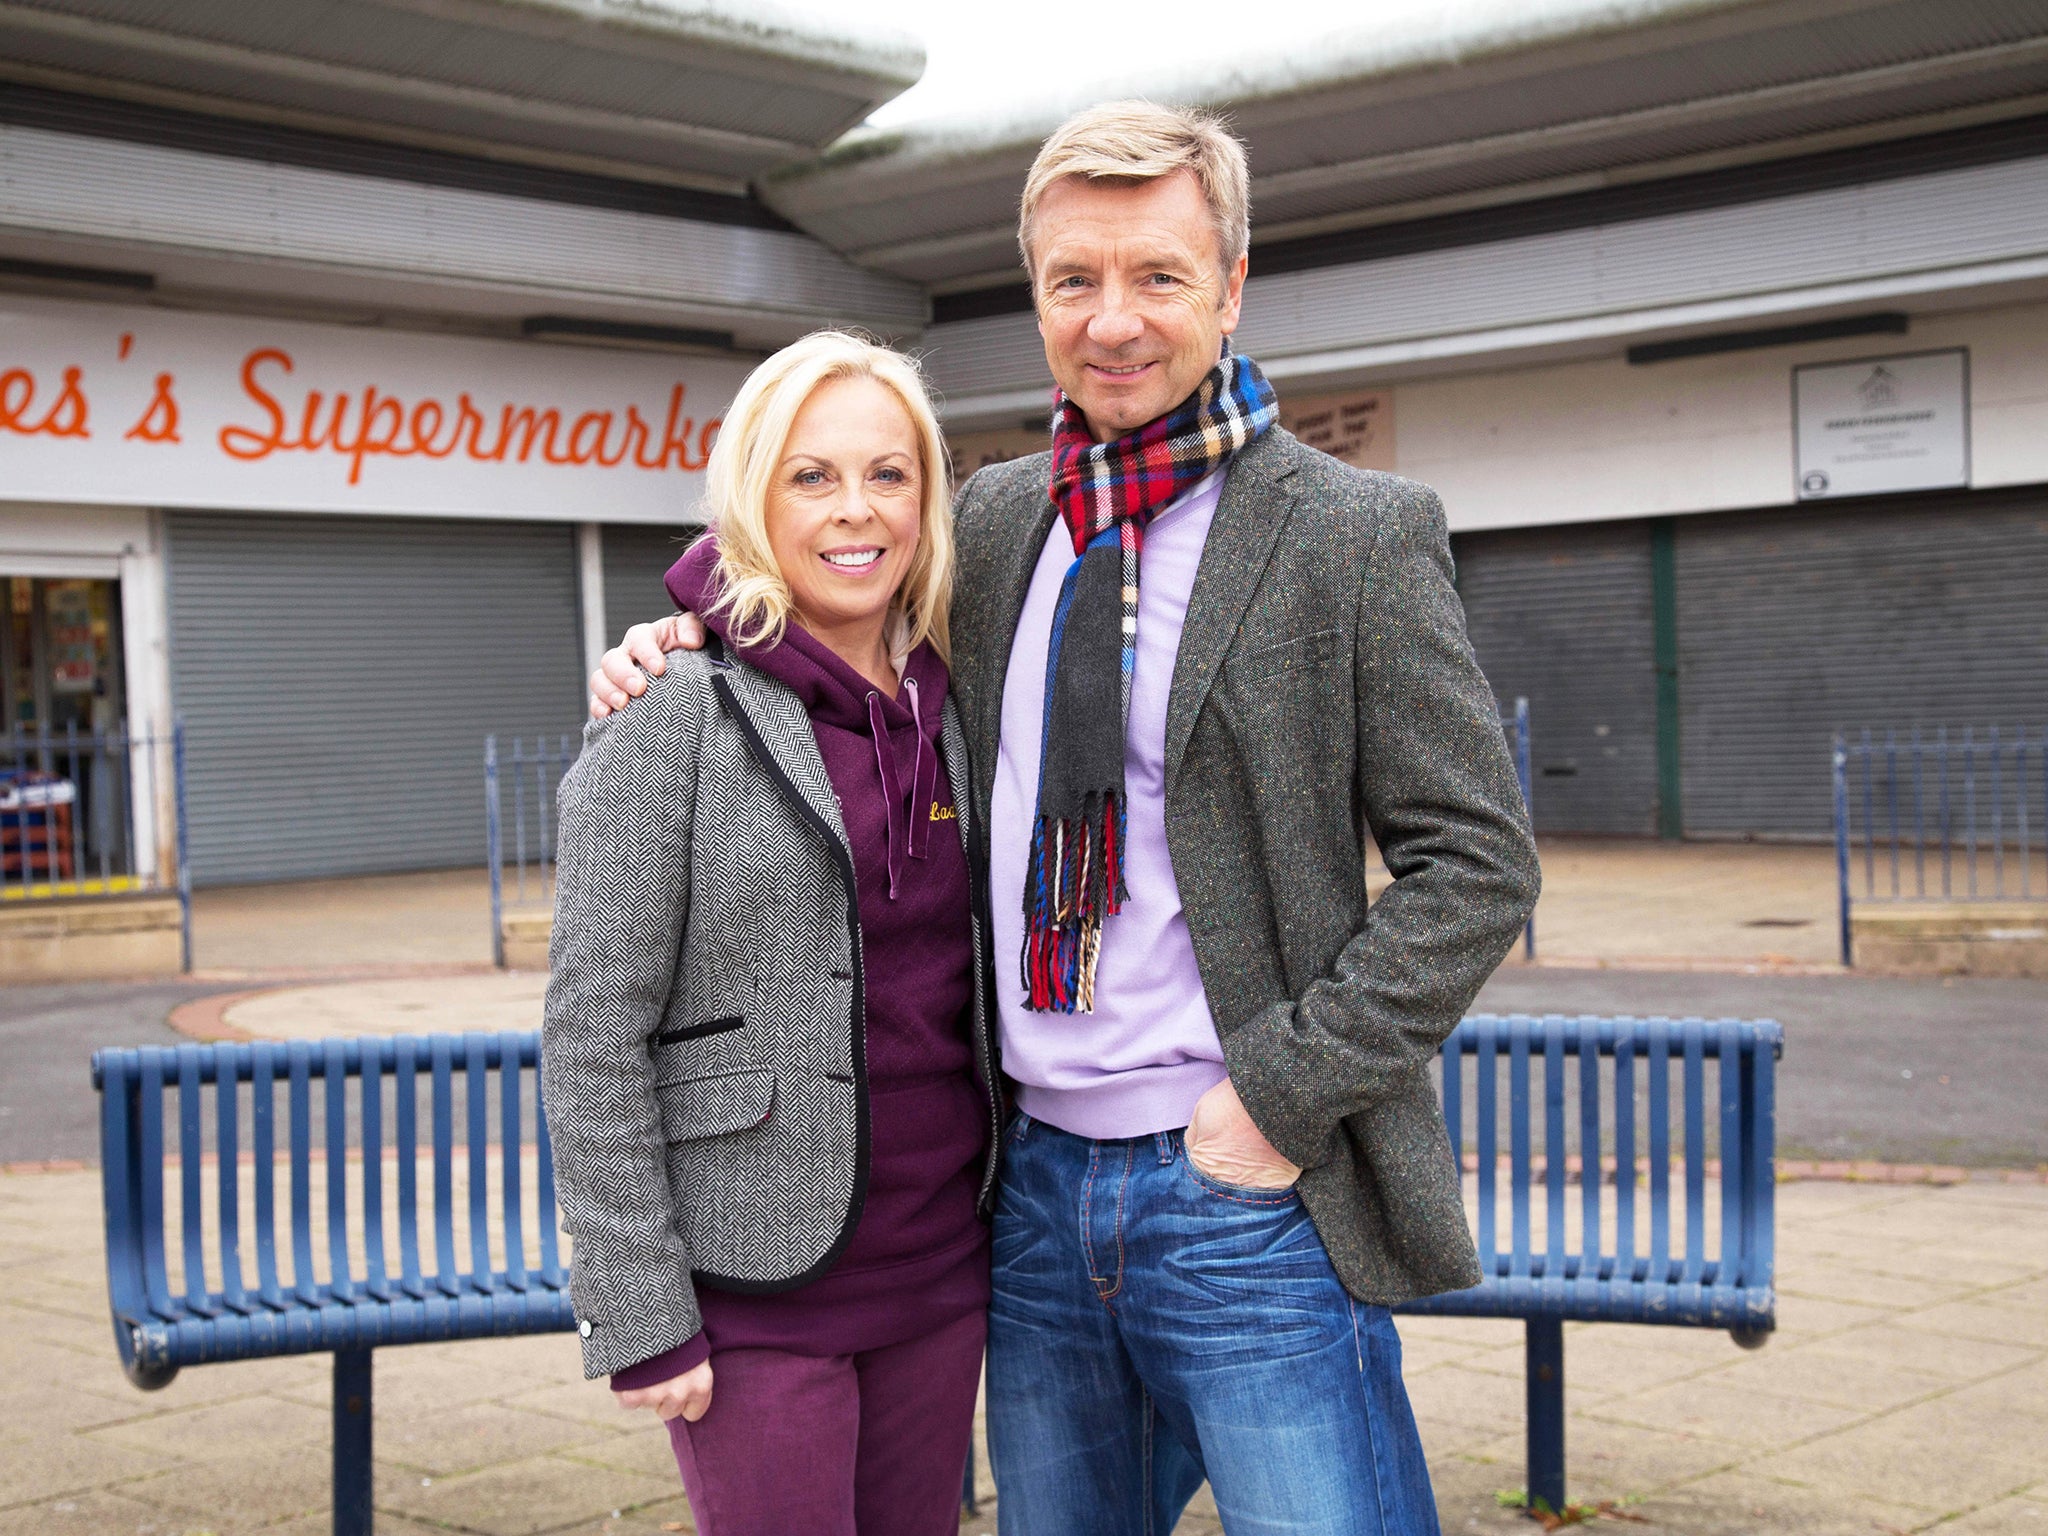 Olympic ice dancers Jayne Torvill and Christopher Dean